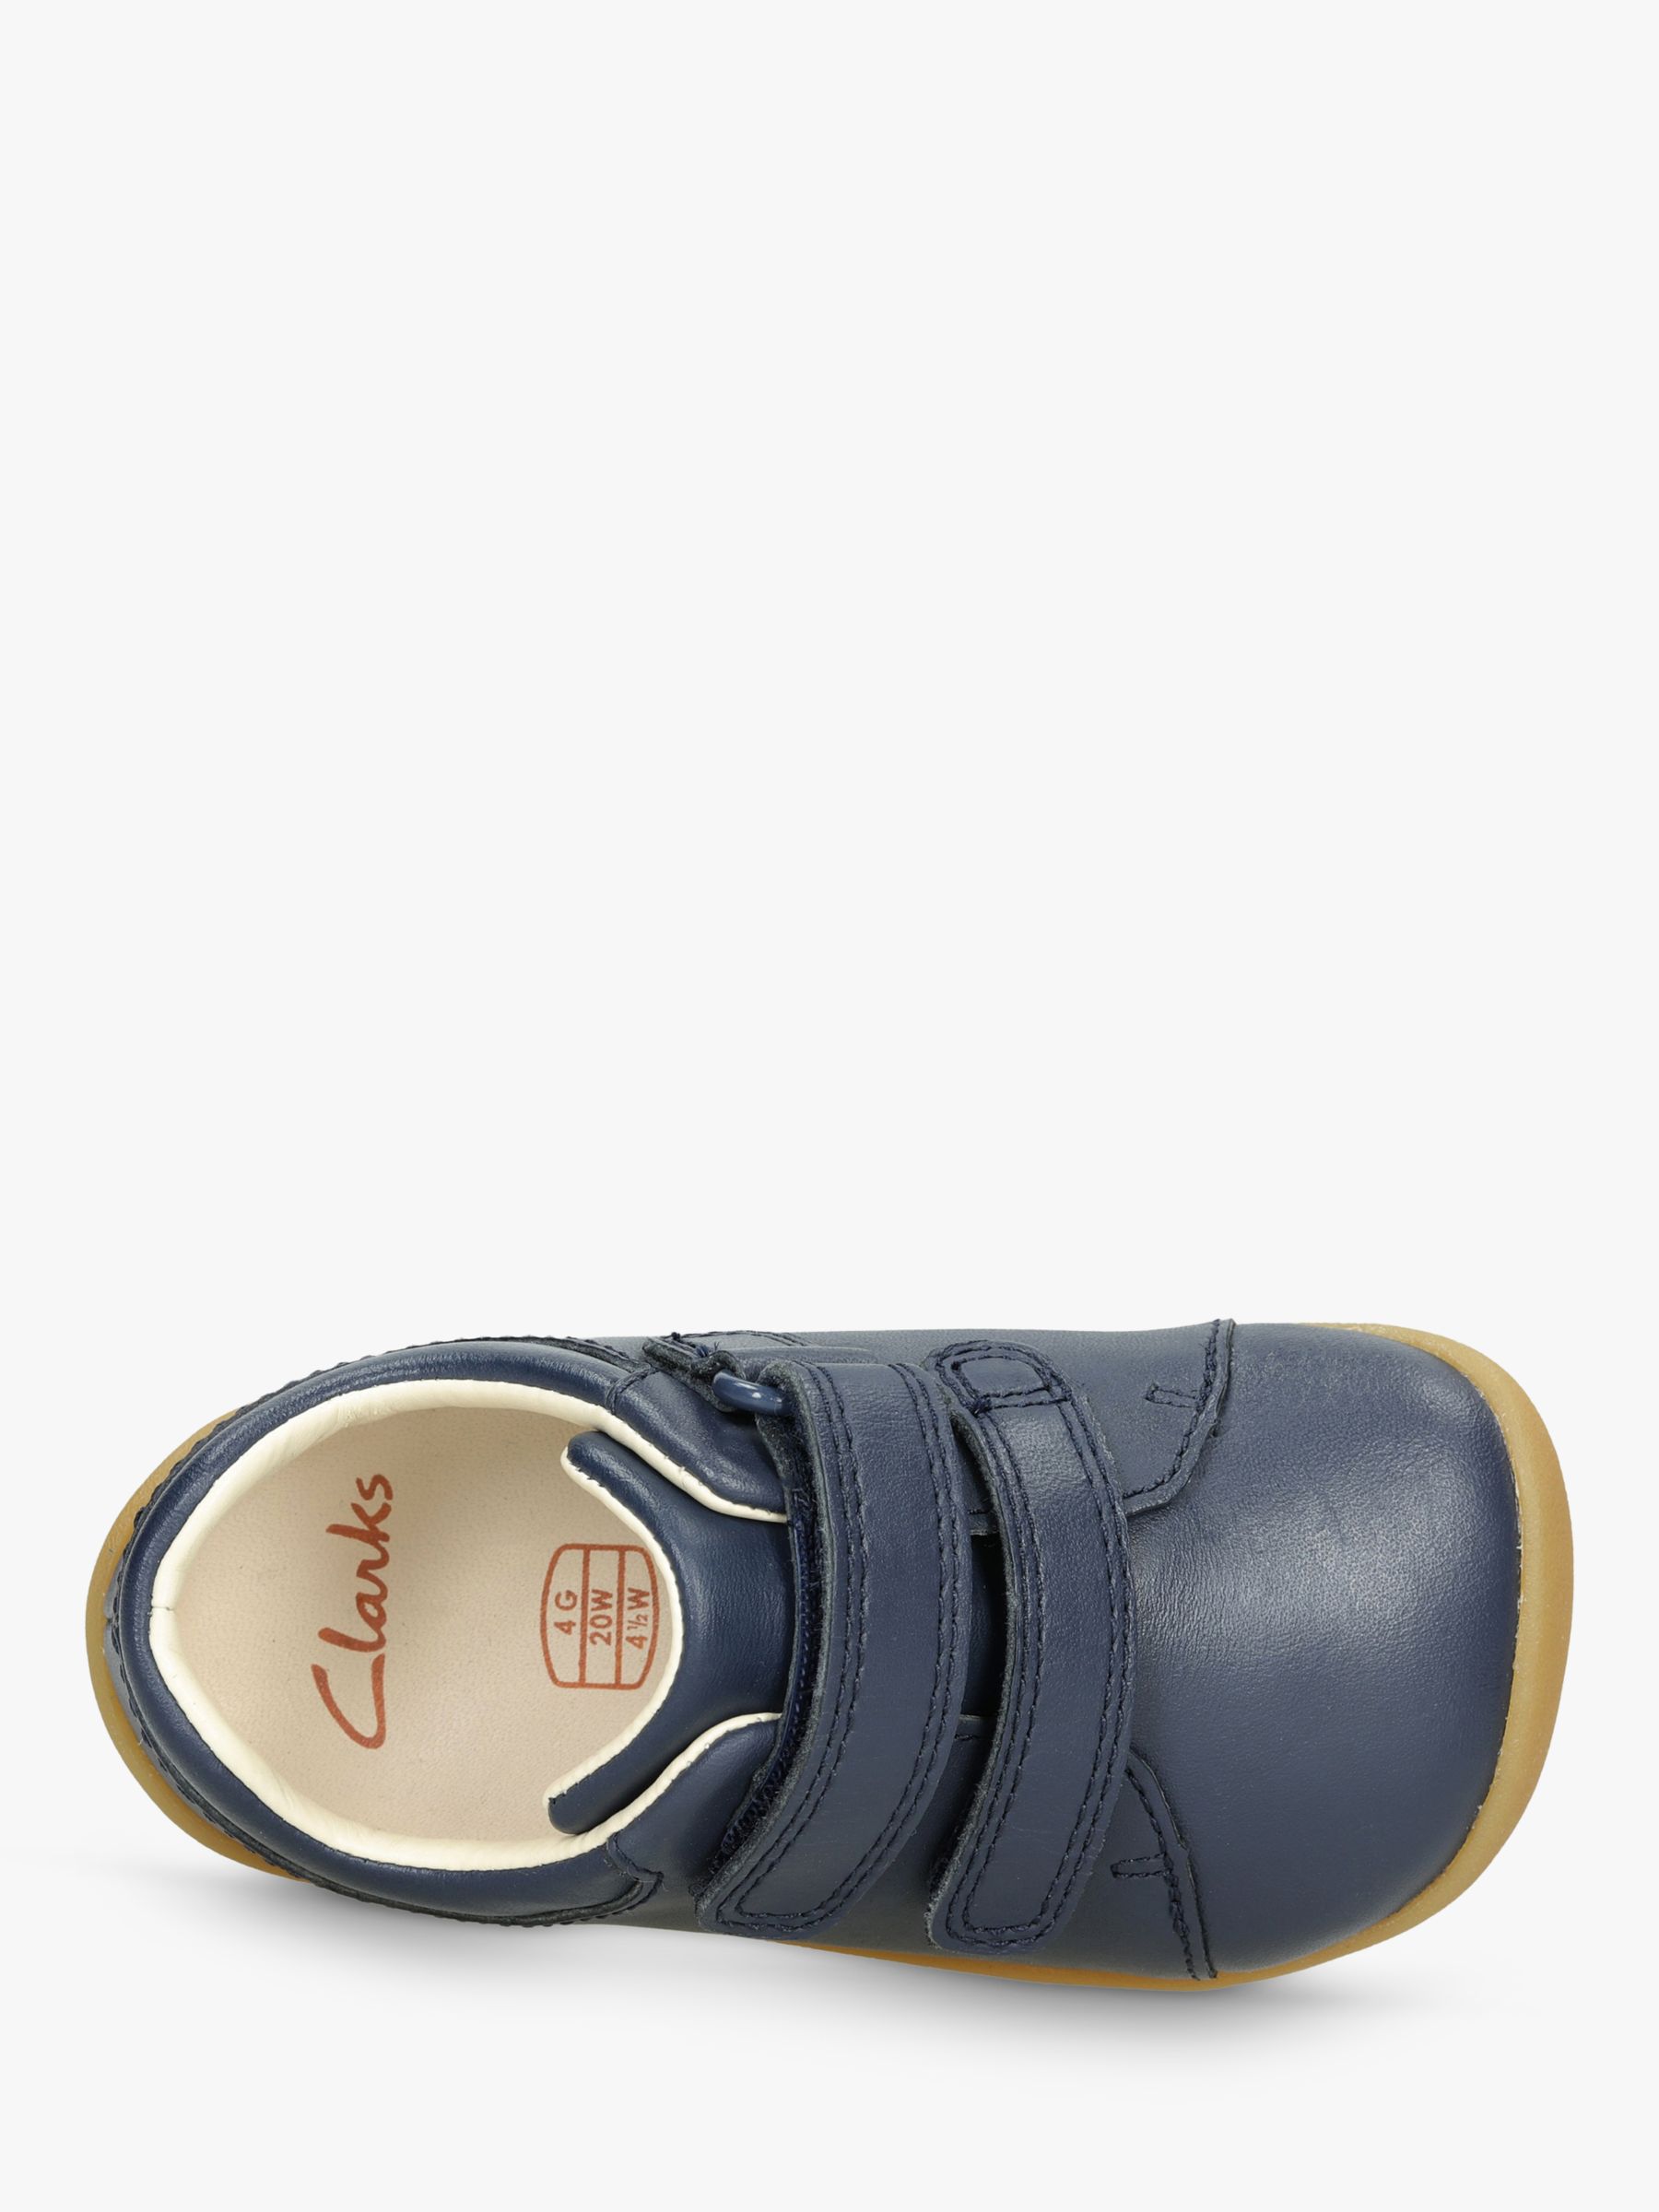 Clarks Roamer Craft Leather Riptape Shoes, Navy at John Lewis Partners